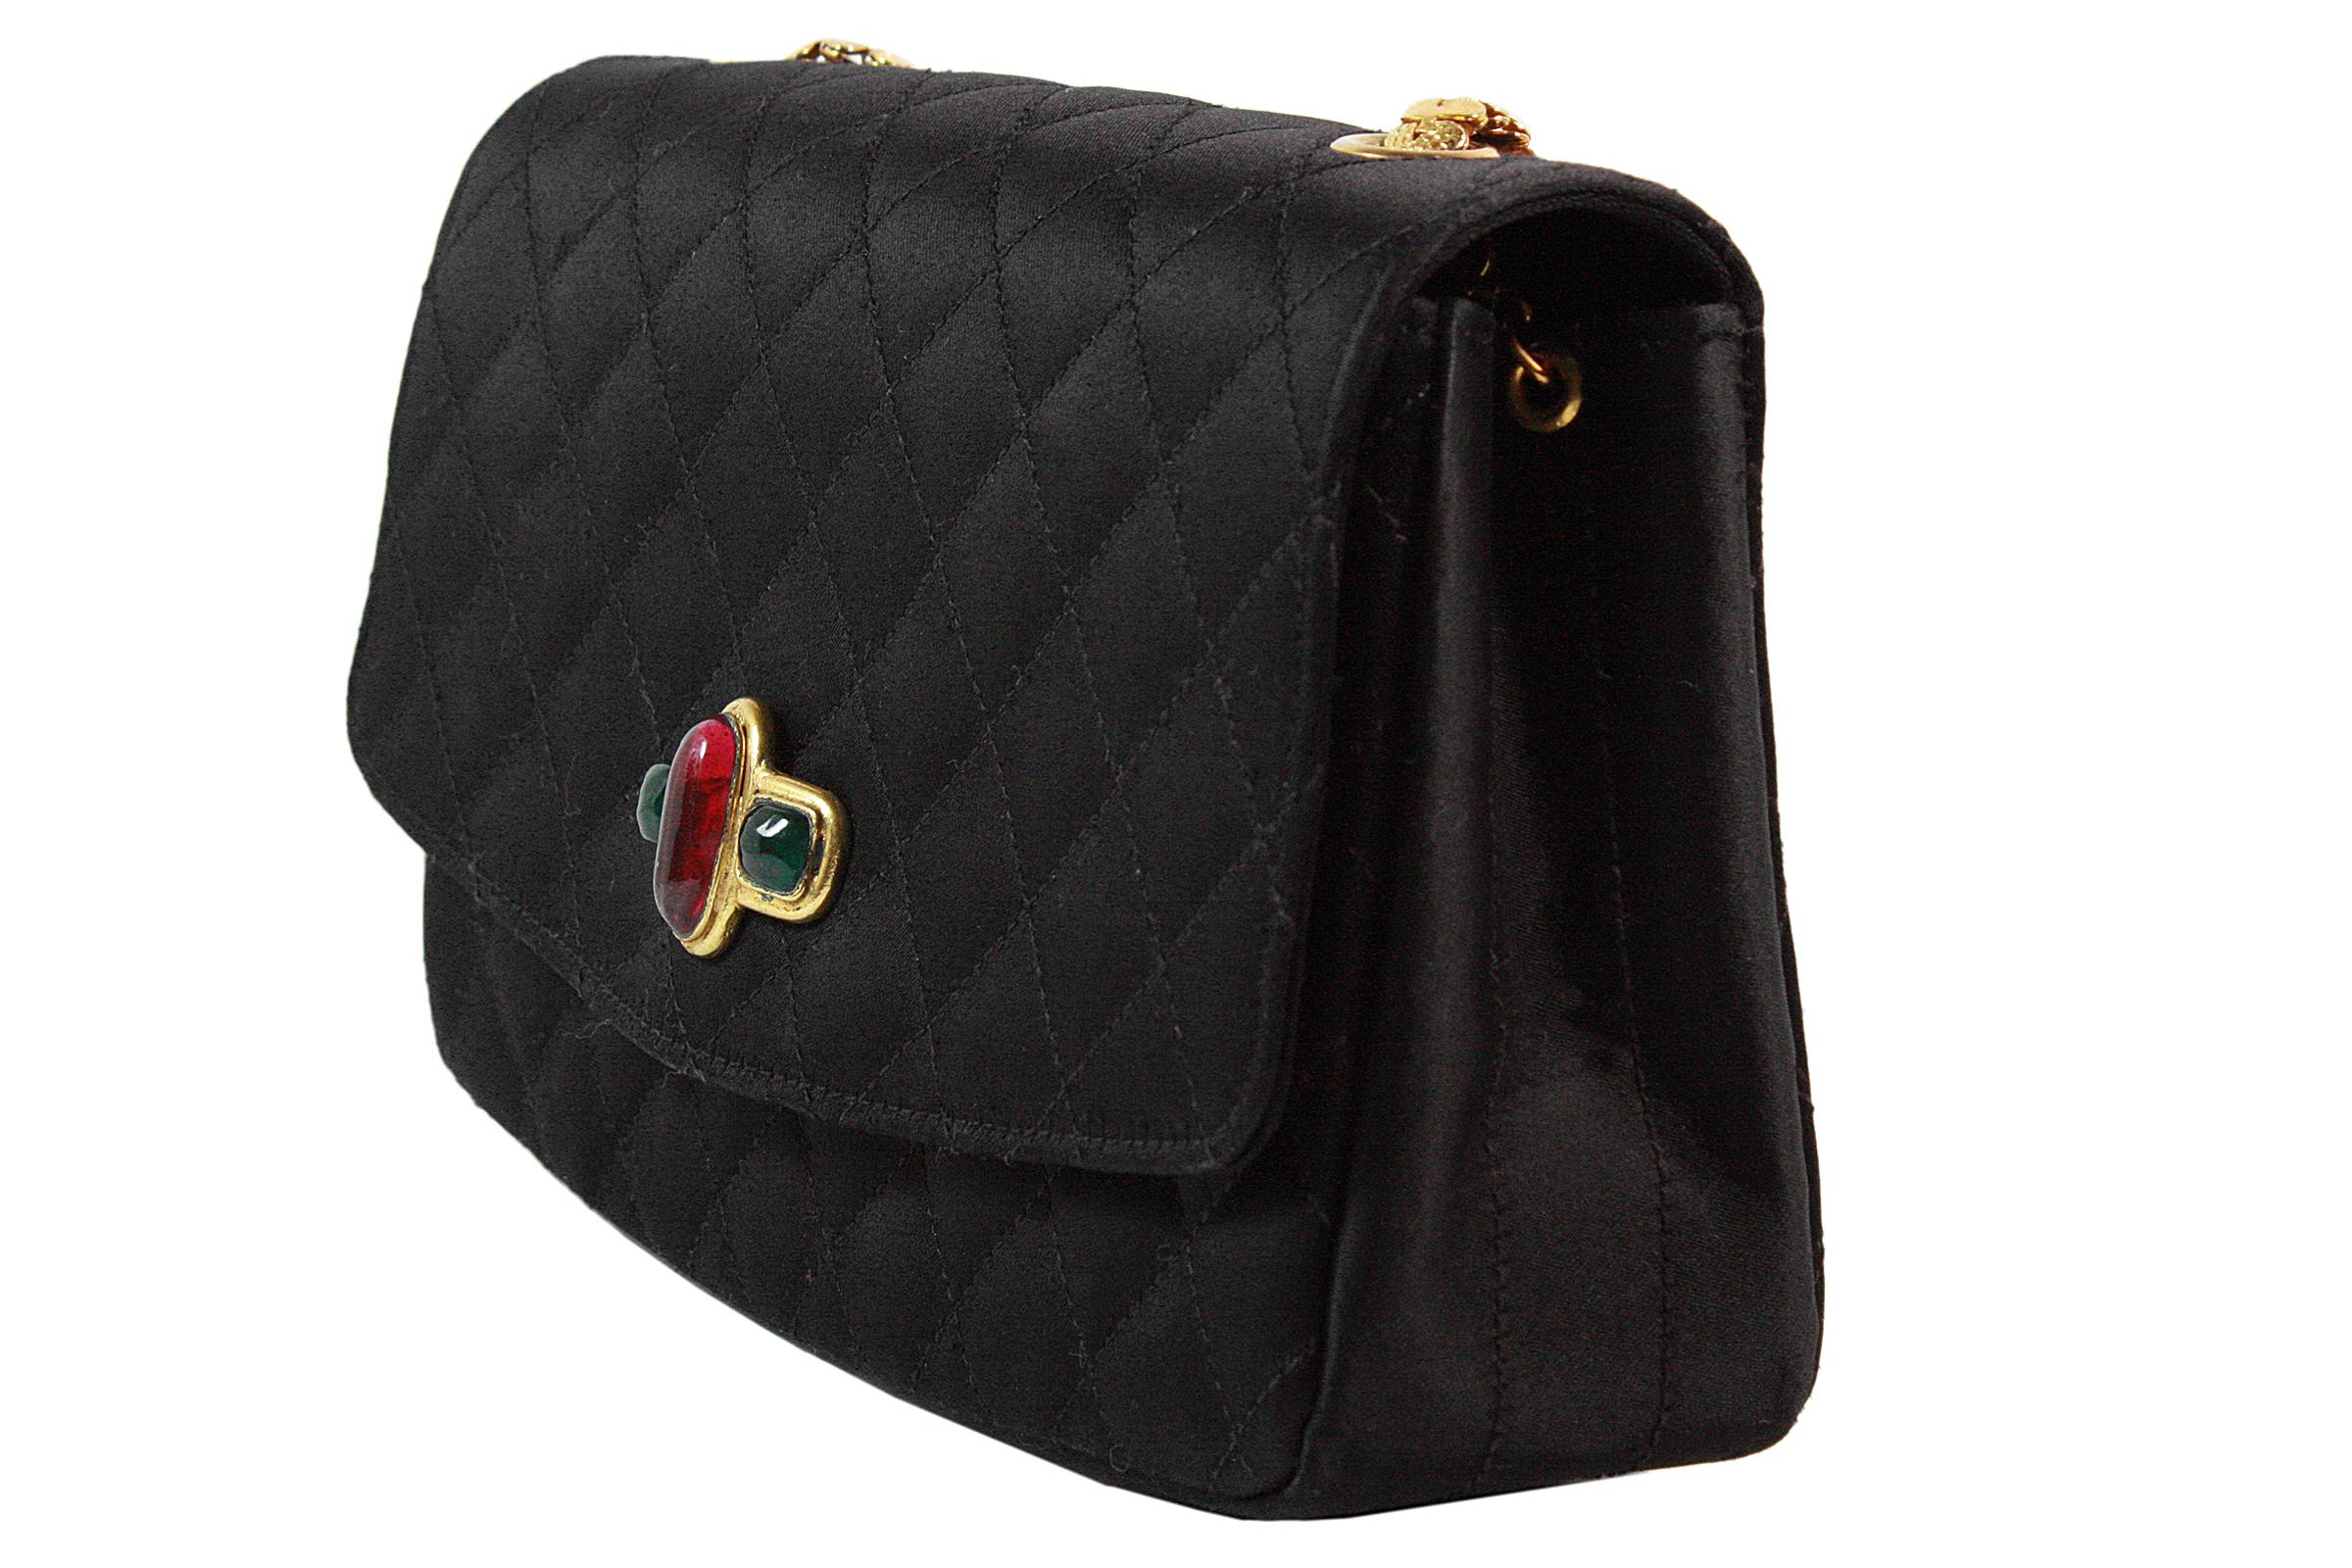 Women's Chanel Black Satin Quilted Crossbody Bag with a Red and Green Gripoix Jewel